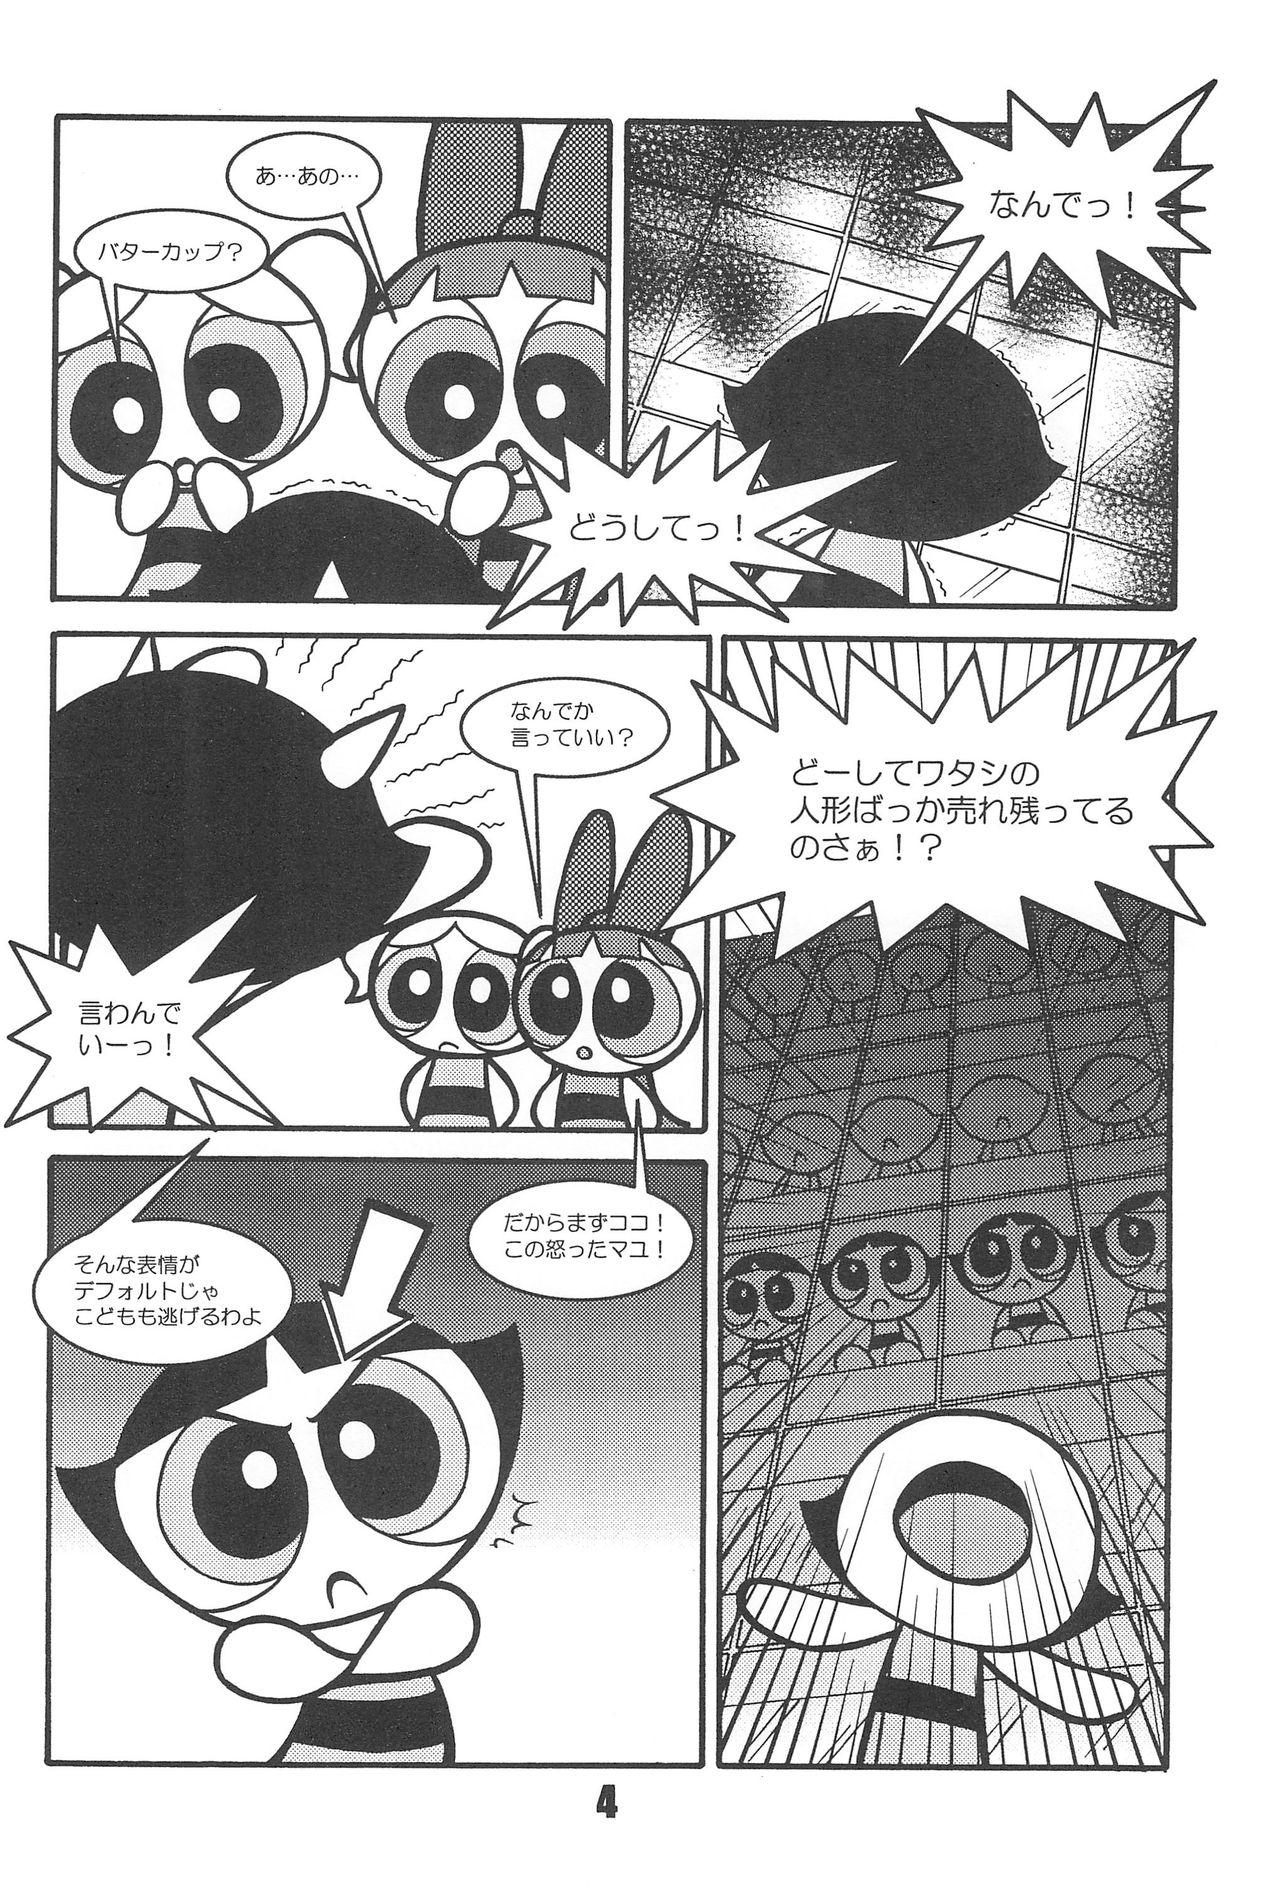 Pervs Show Goes On! Funhouse 22th - The powerpuff girls Hard - Page 4